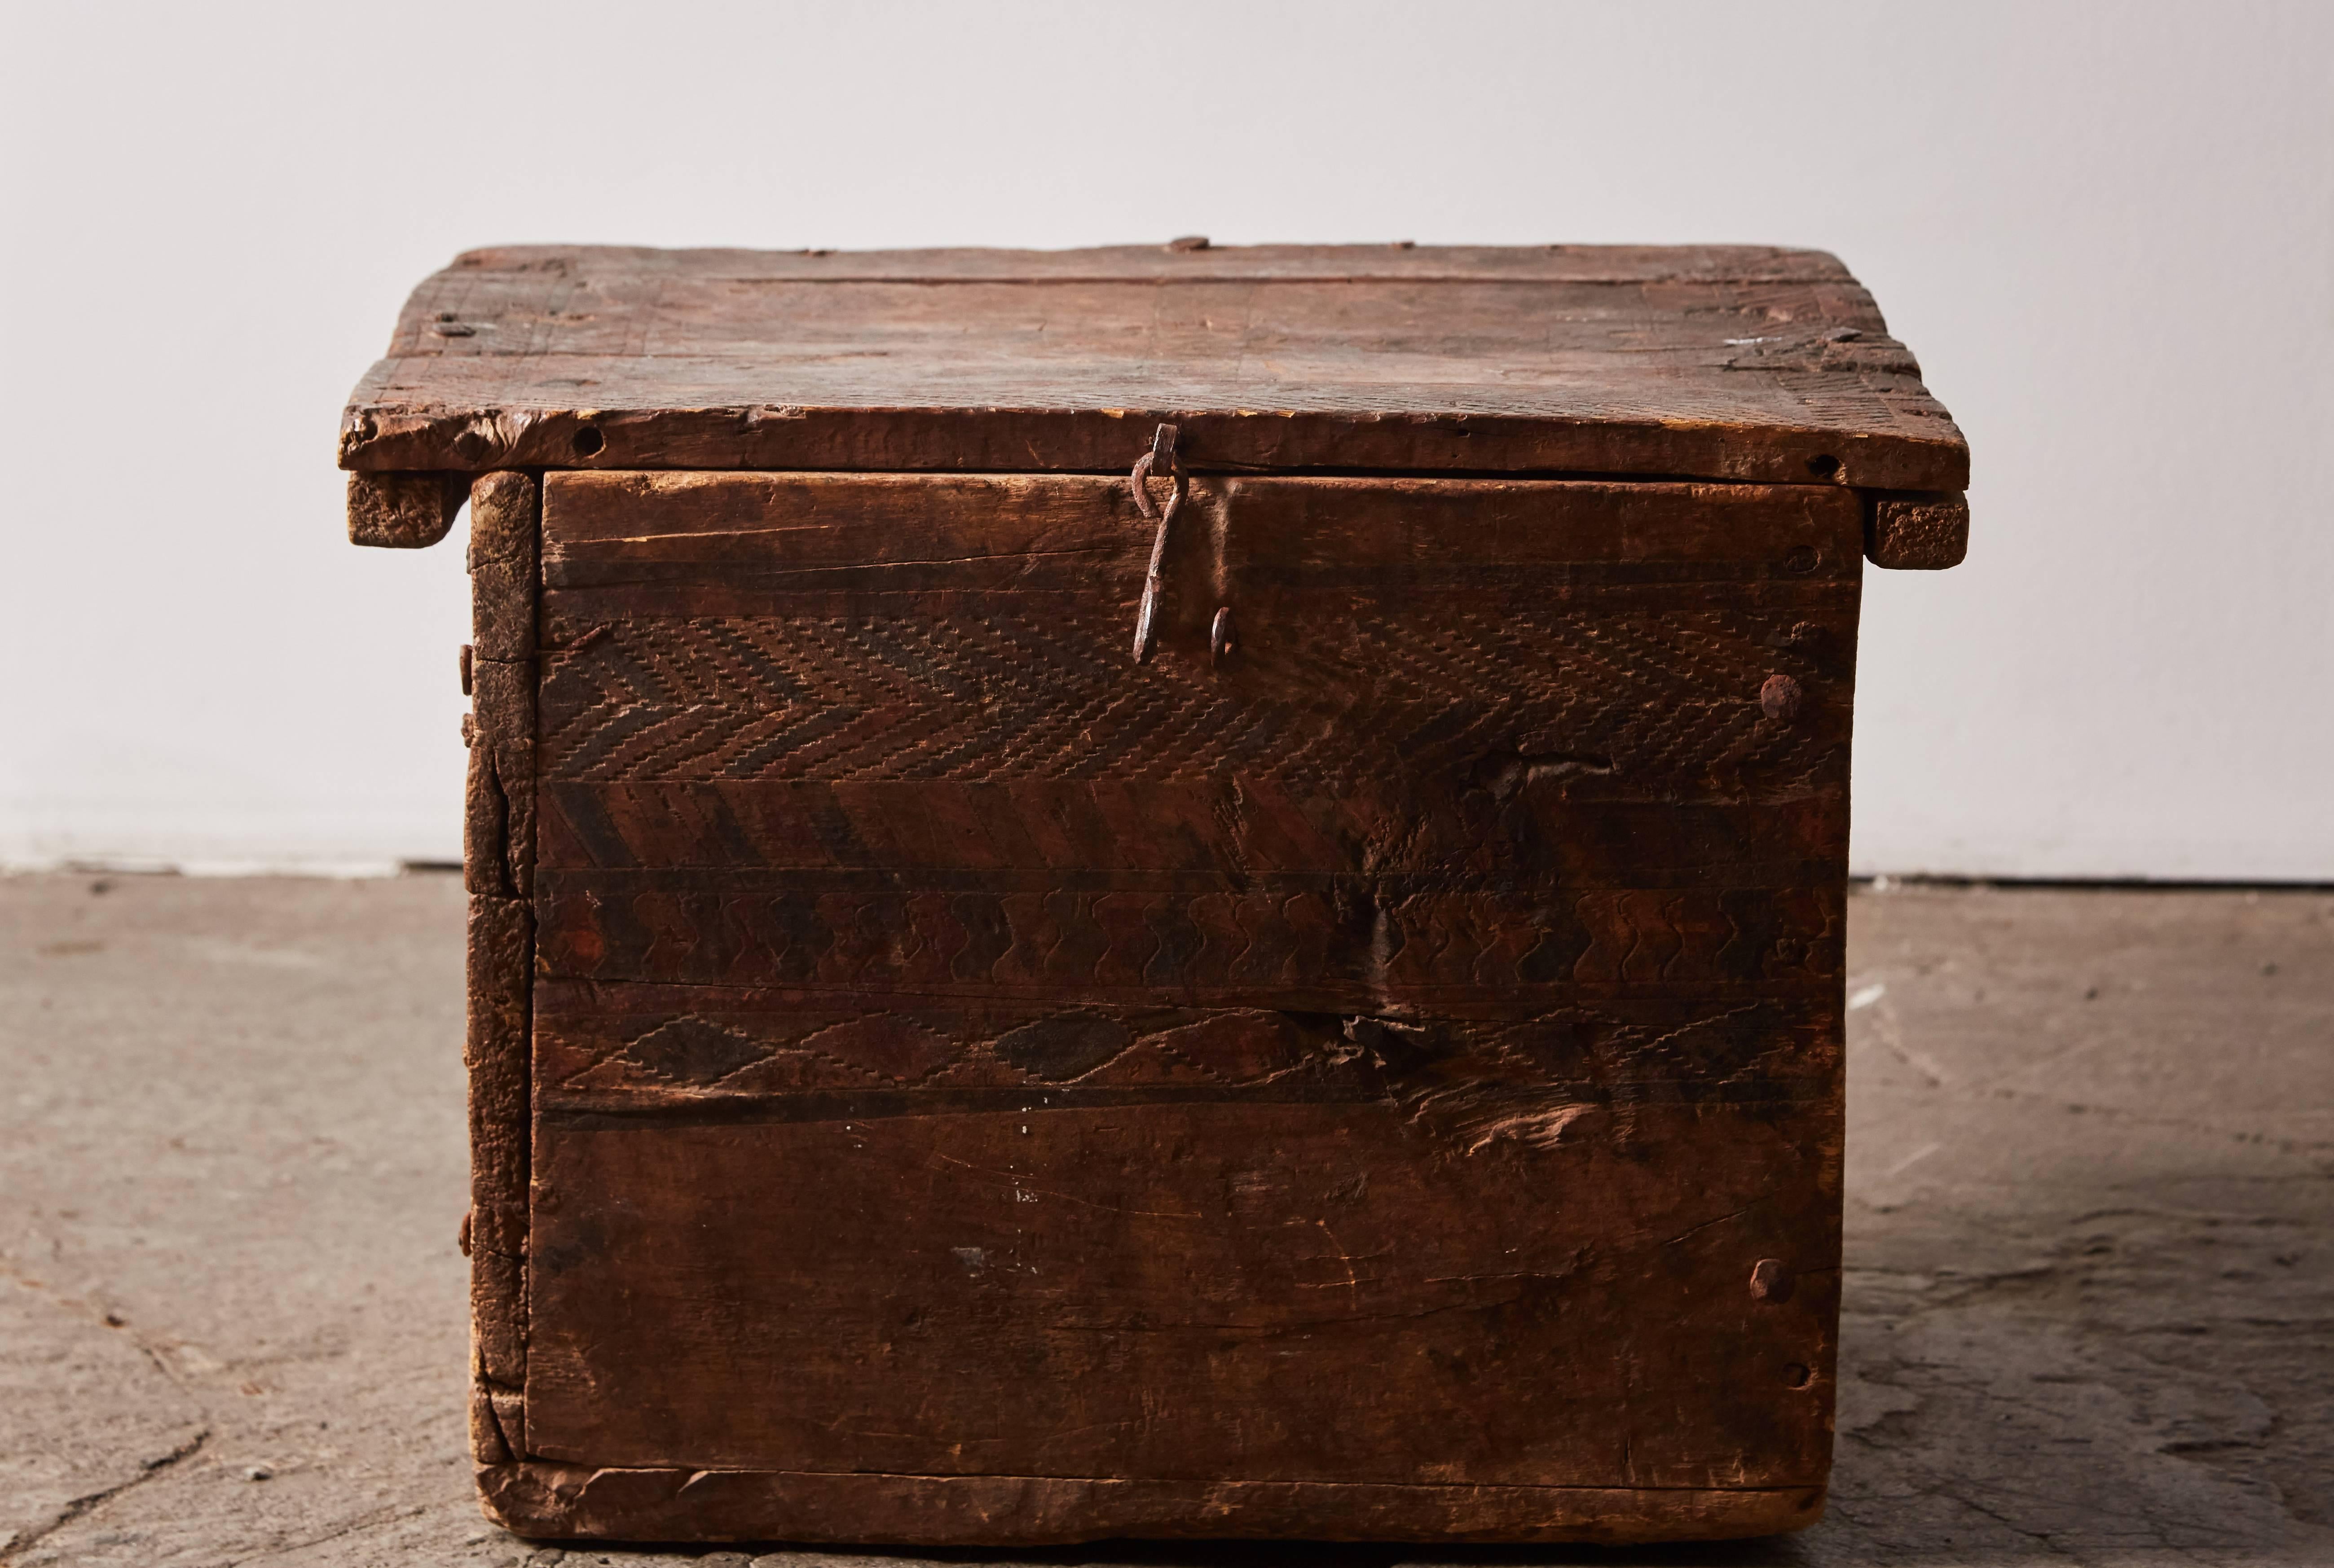 Primitive hand-carved and painted latched box with viking imagery. Made in Russia, circa 1850s.